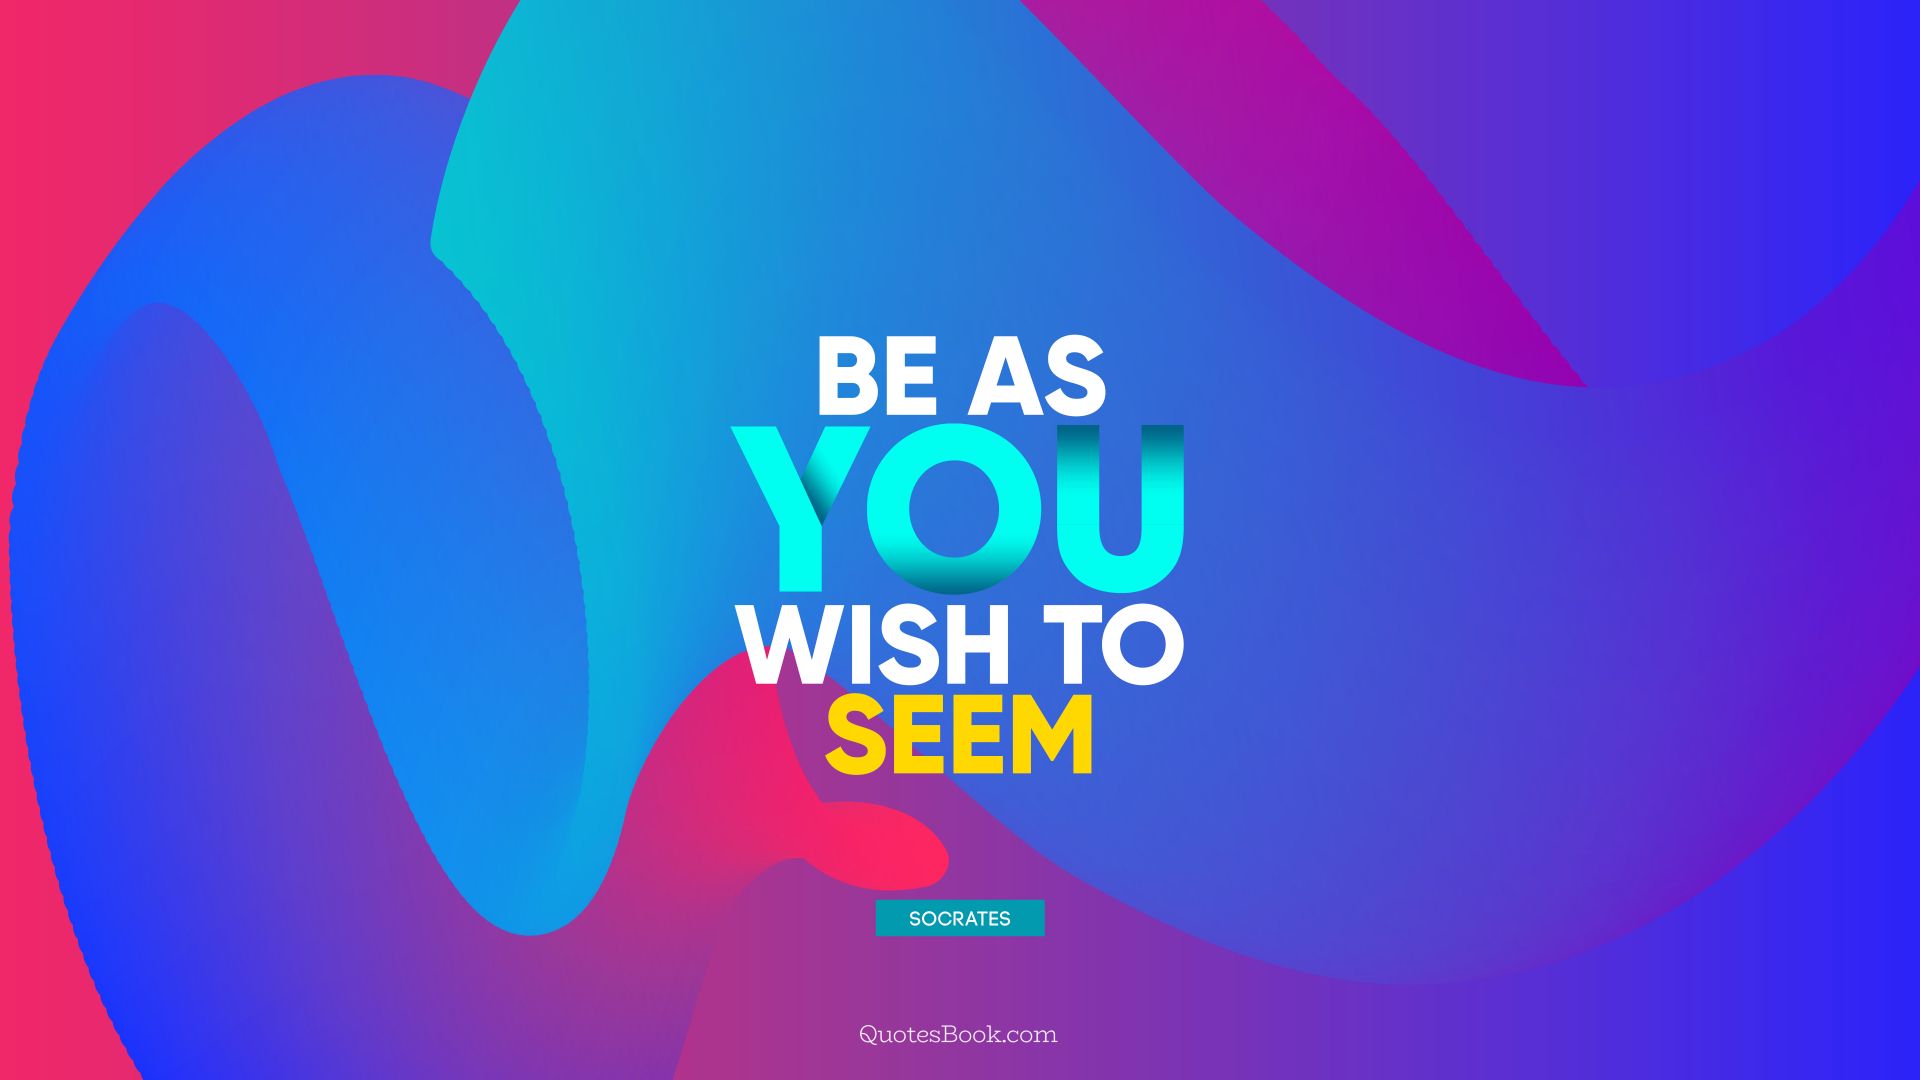 Be as you wish to seem. - Quote by Socrates